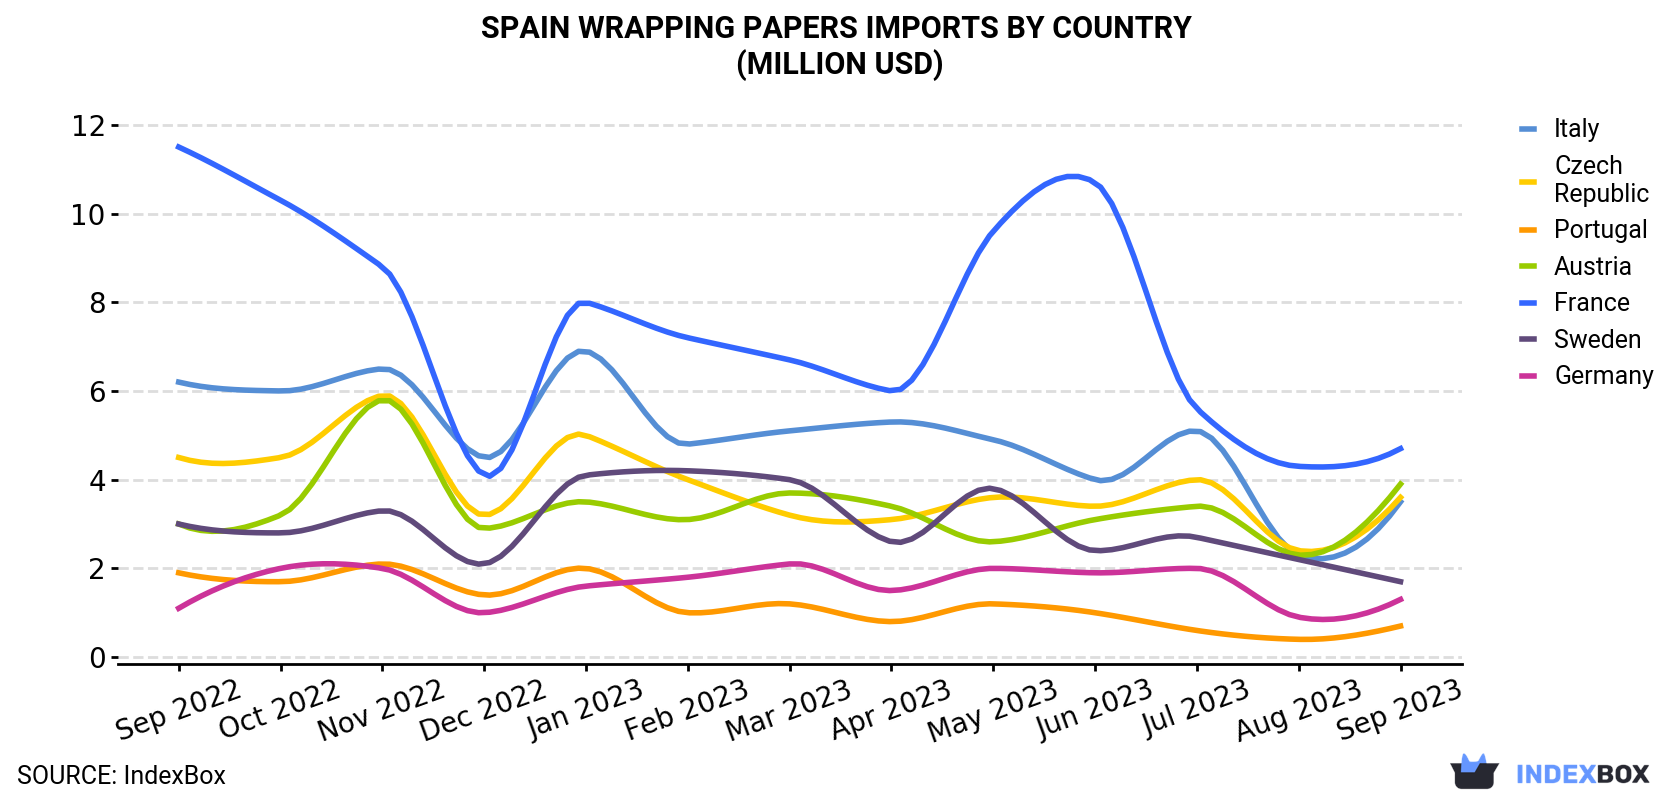 Spain Wrapping Papers Imports By Country (Million USD)